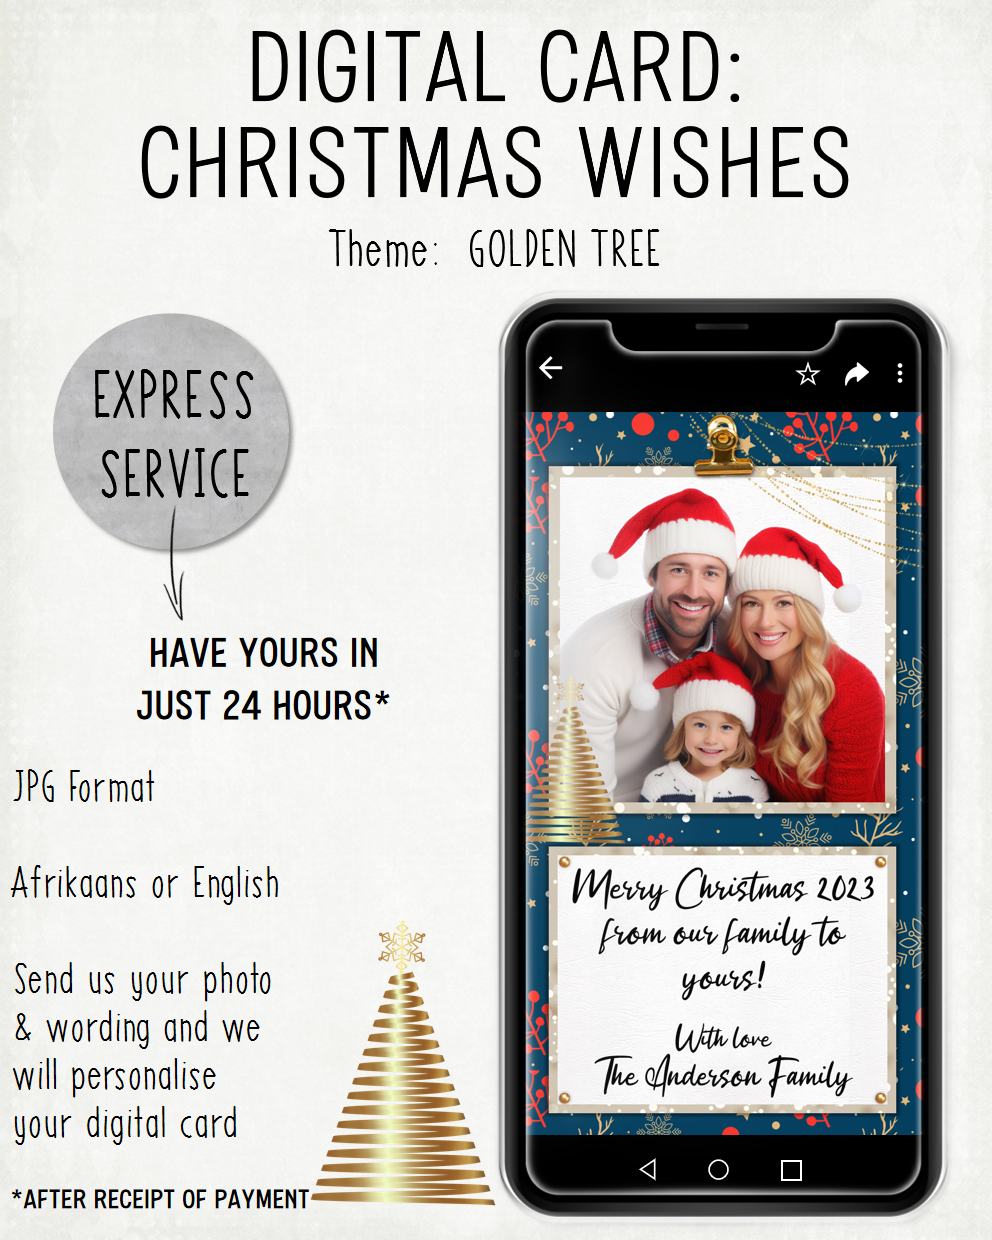 DIGITAL CARD:  Christmas Wishes 2023 - Golden Tree (Afrikaans / English)